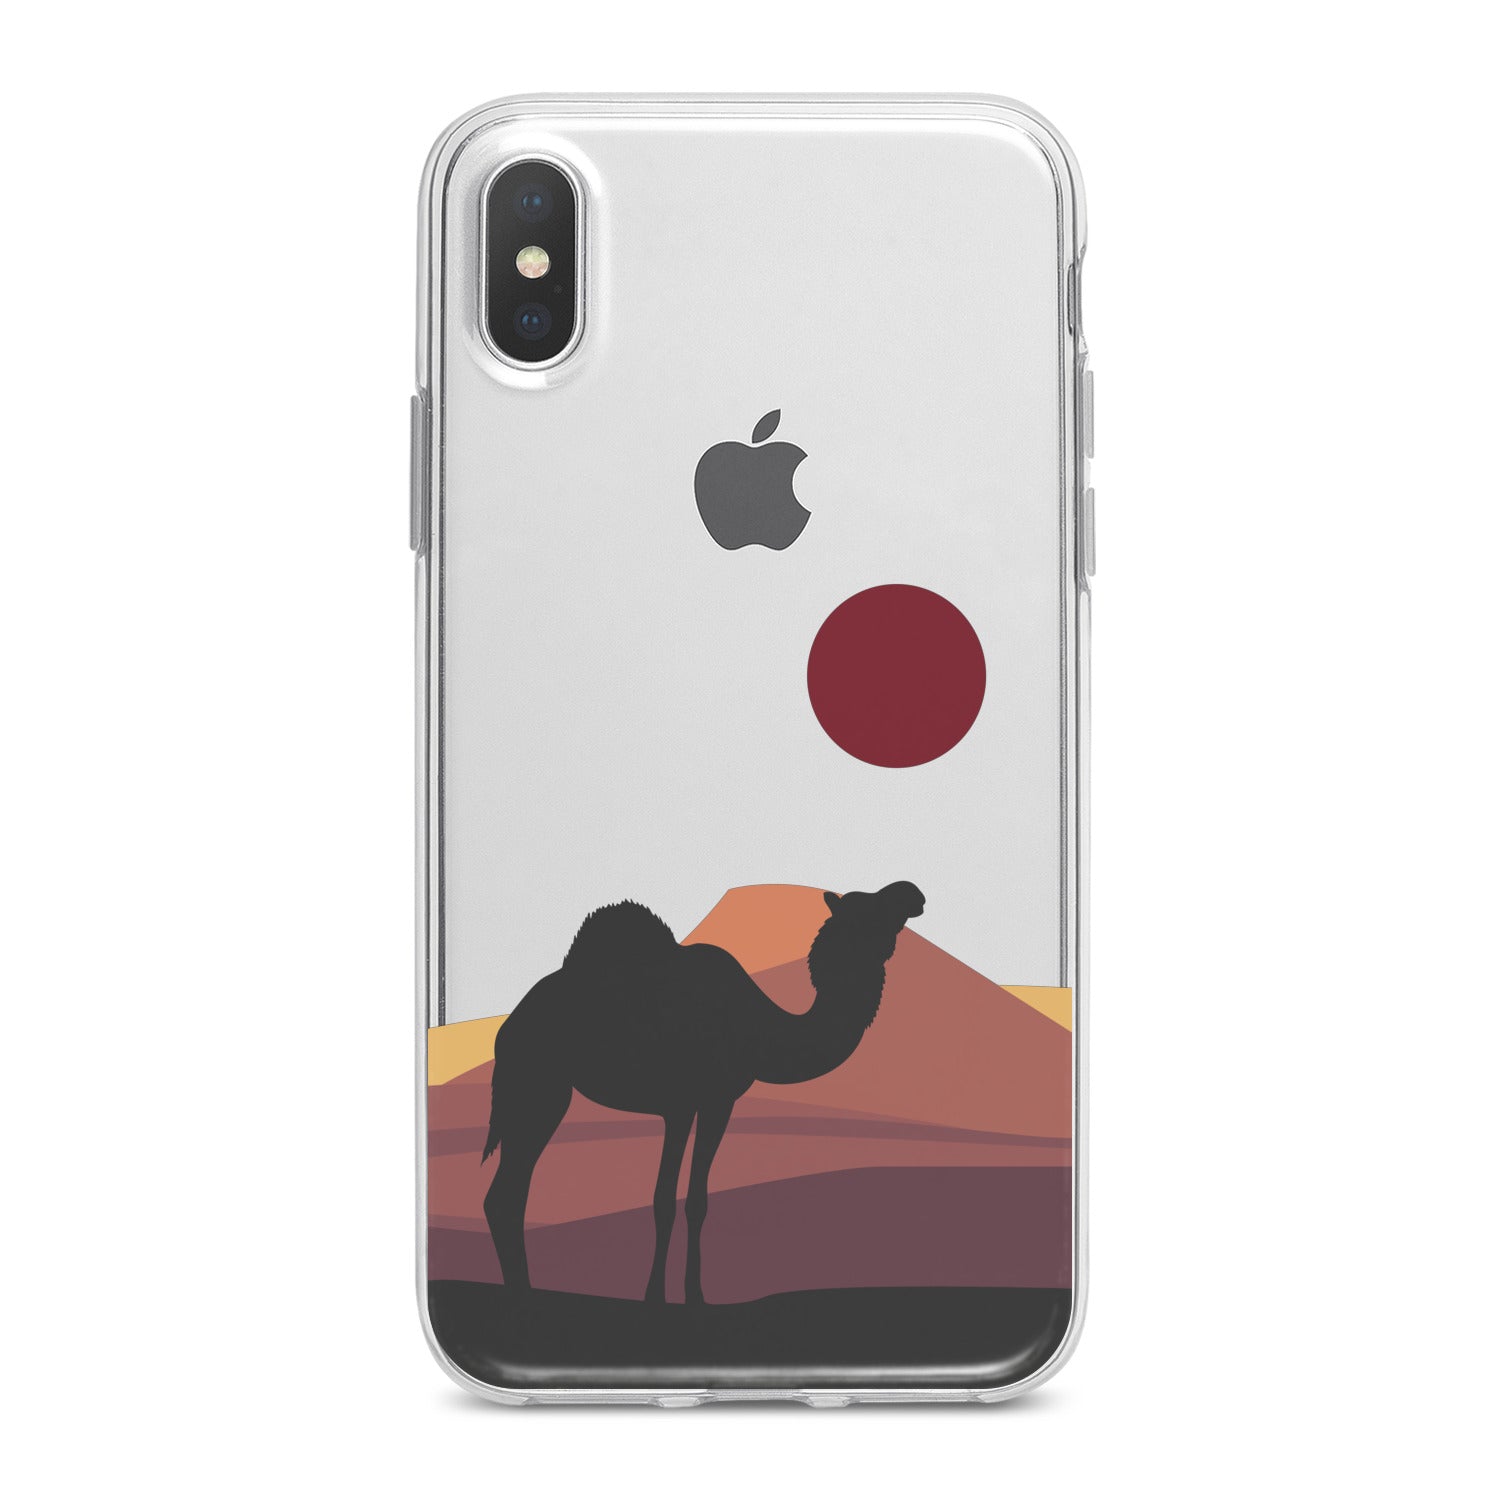 Lex Altern Desert Art Phone Case for your iPhone & Android phone.